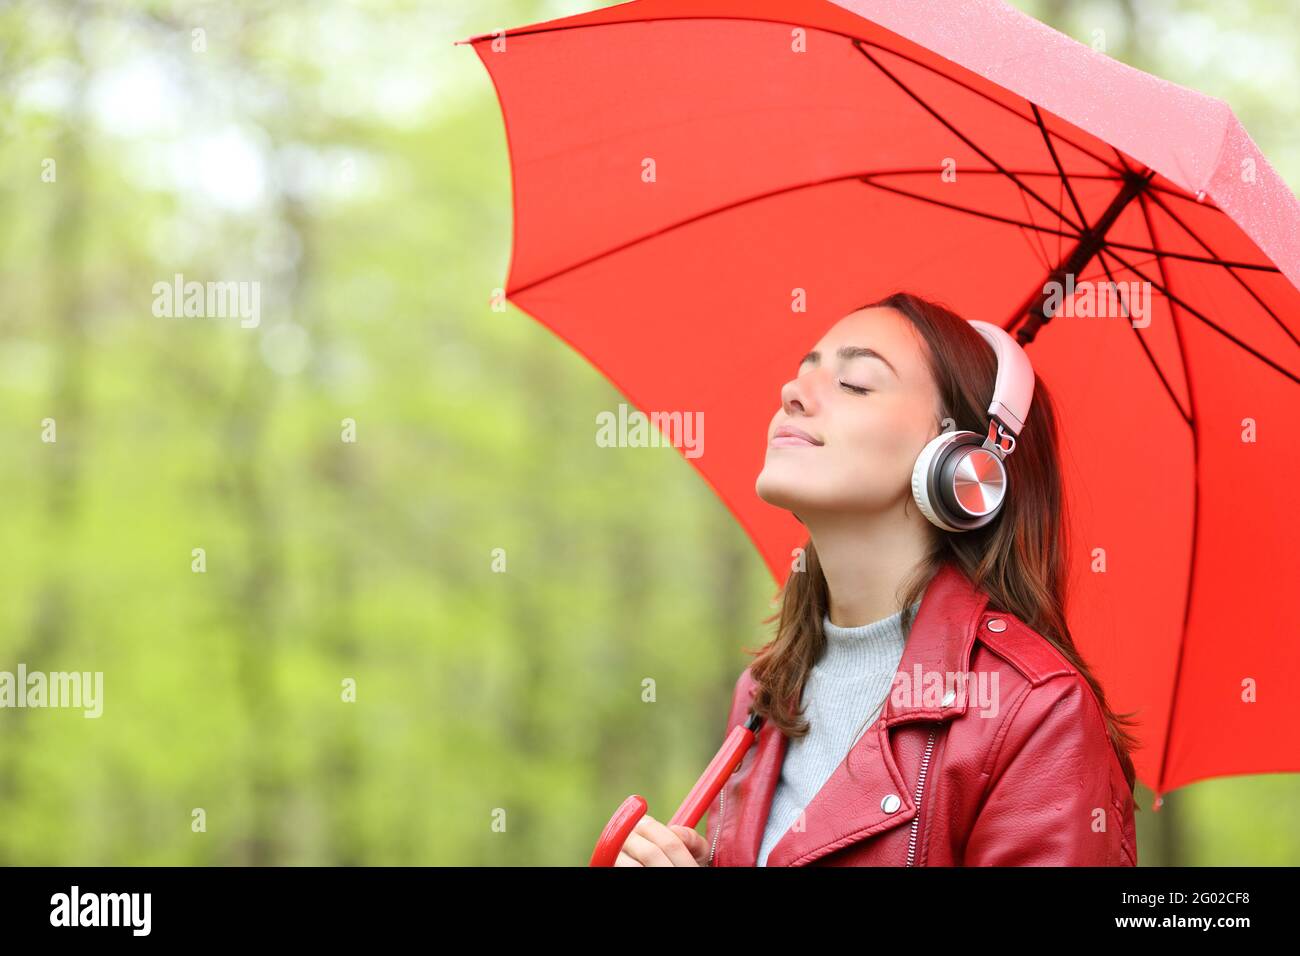 Relaxed woman in red holding umbrella under the rain listening to music wearing wireless headphones in a park Stock Photo